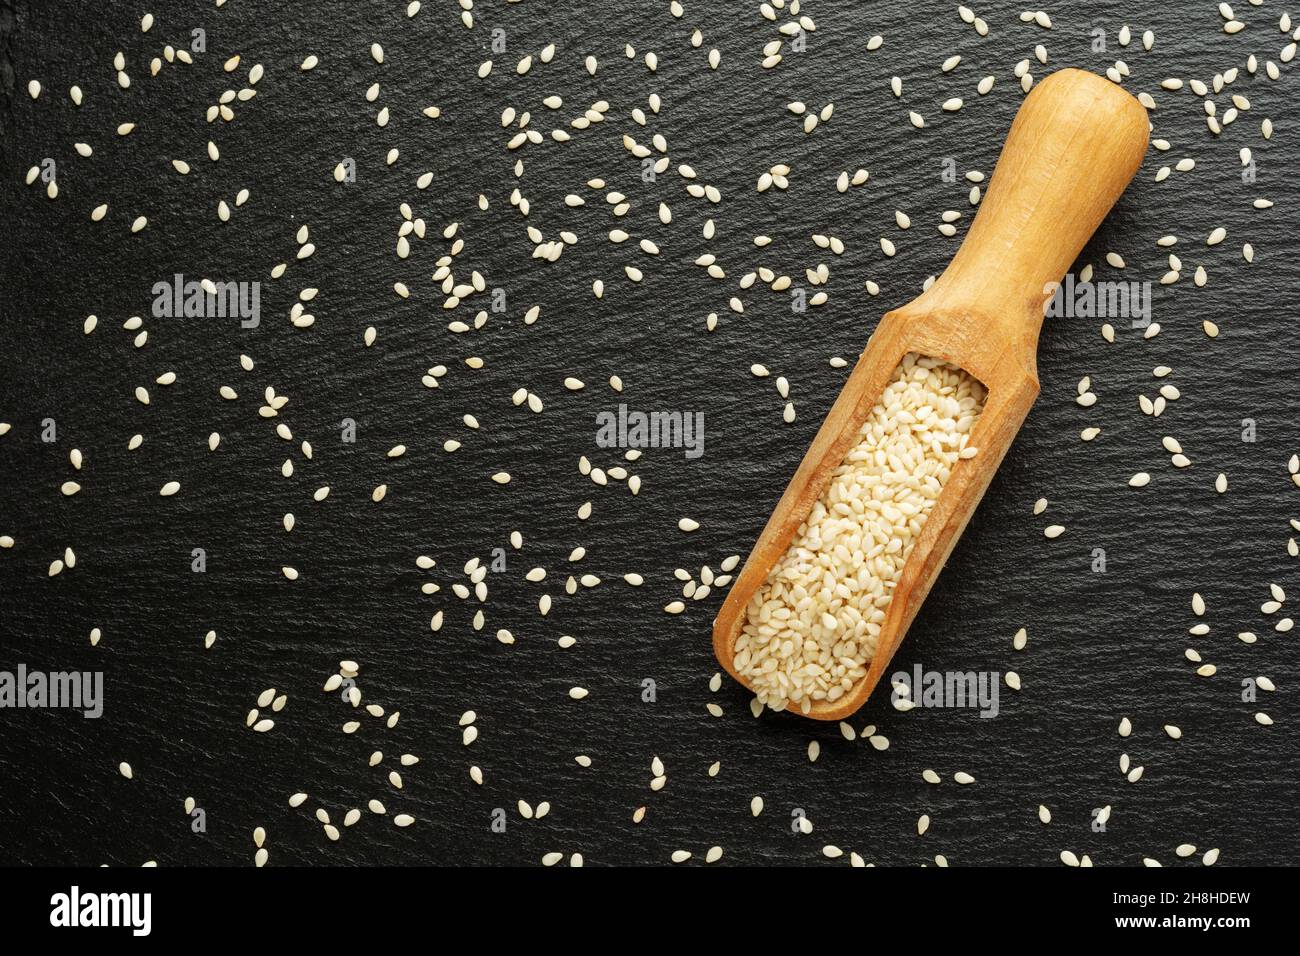 Organic natural sesame seeds on wooden spoon on slate background. Stock Photo